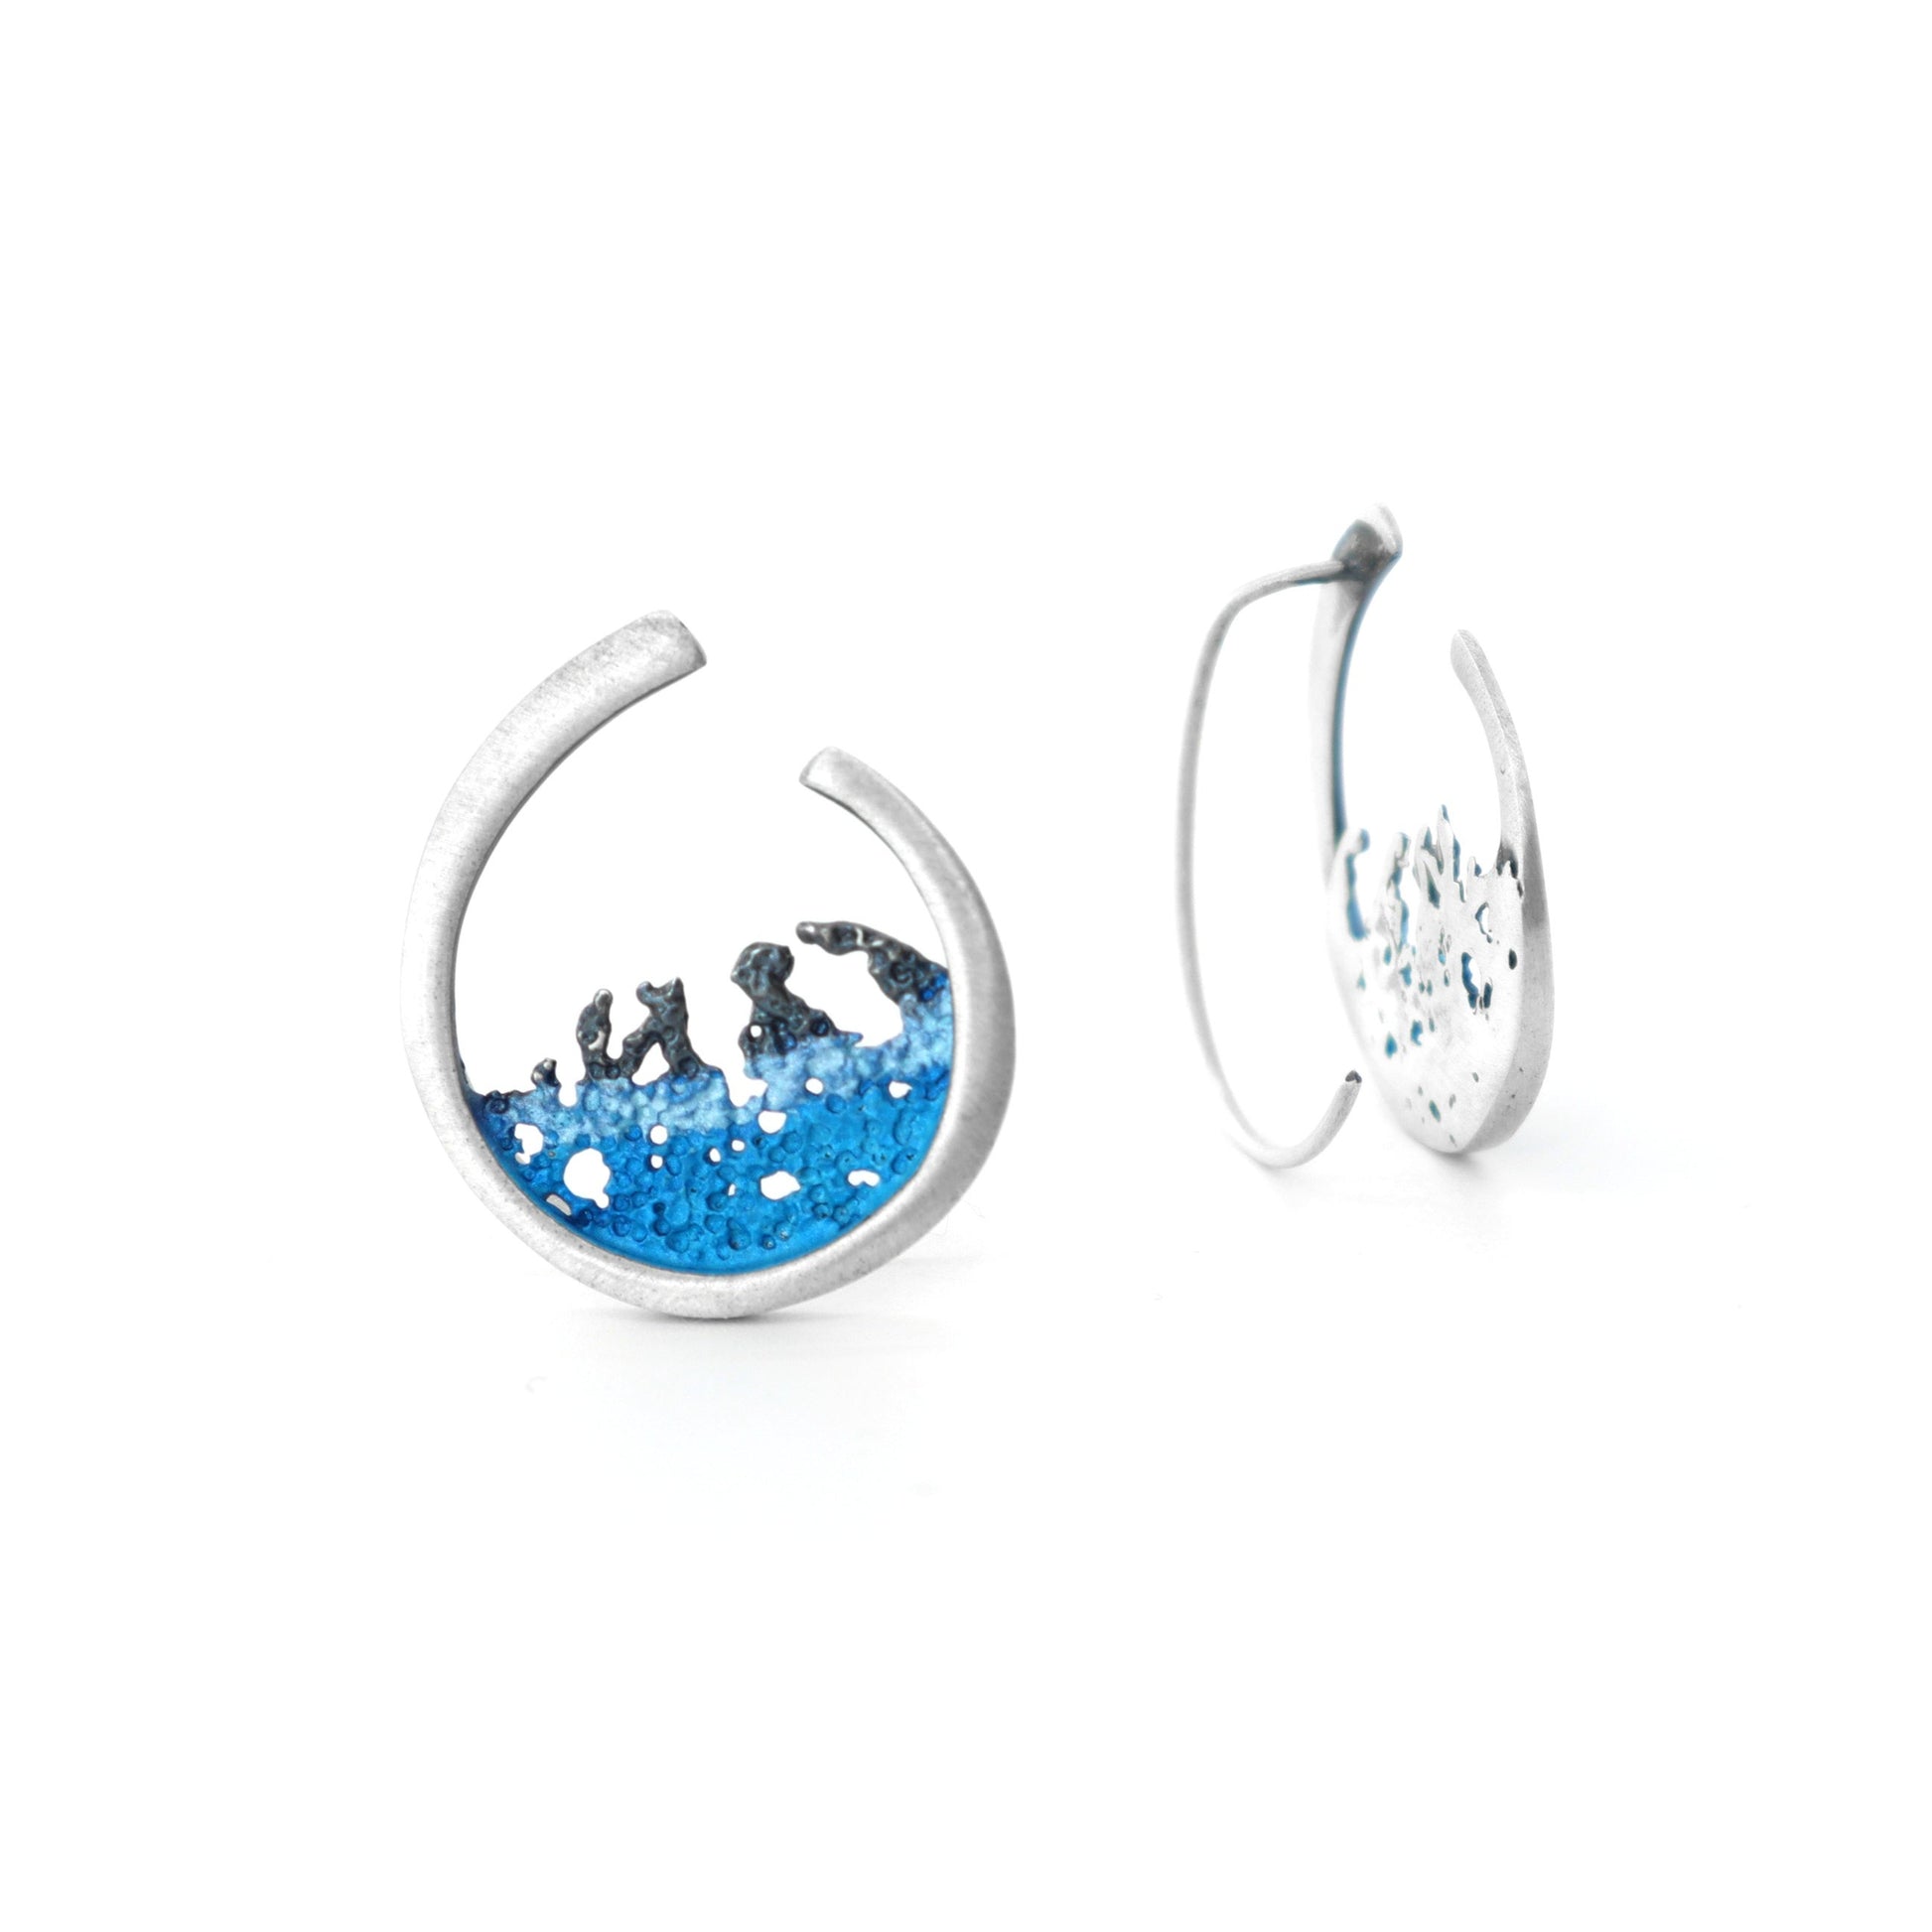 orfega wave earrings with a hook back, in blue, sterling silver and natural pigments